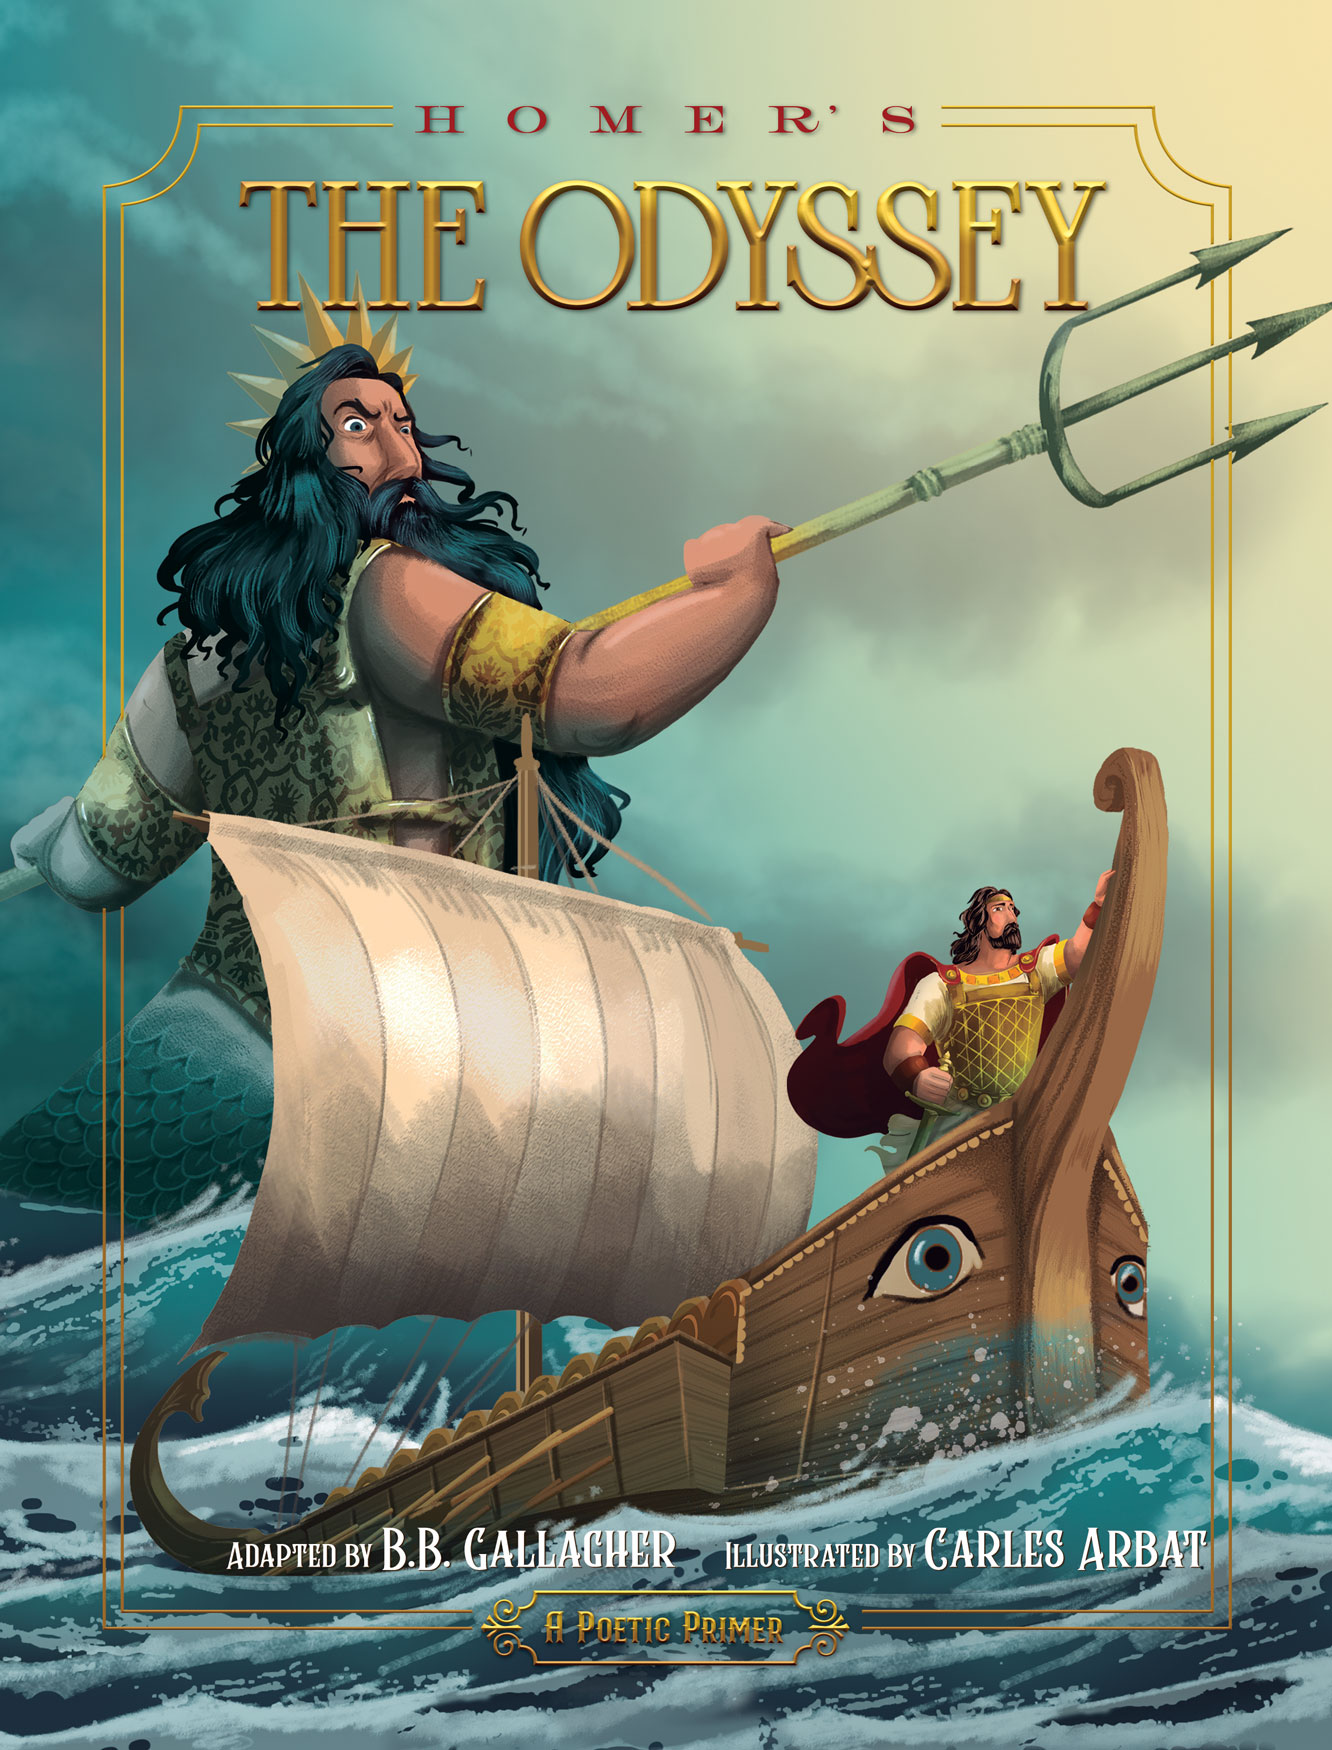 Homer's The Odyssey / Adapted by B B Gallagher, Illustrated by Charles Arbat